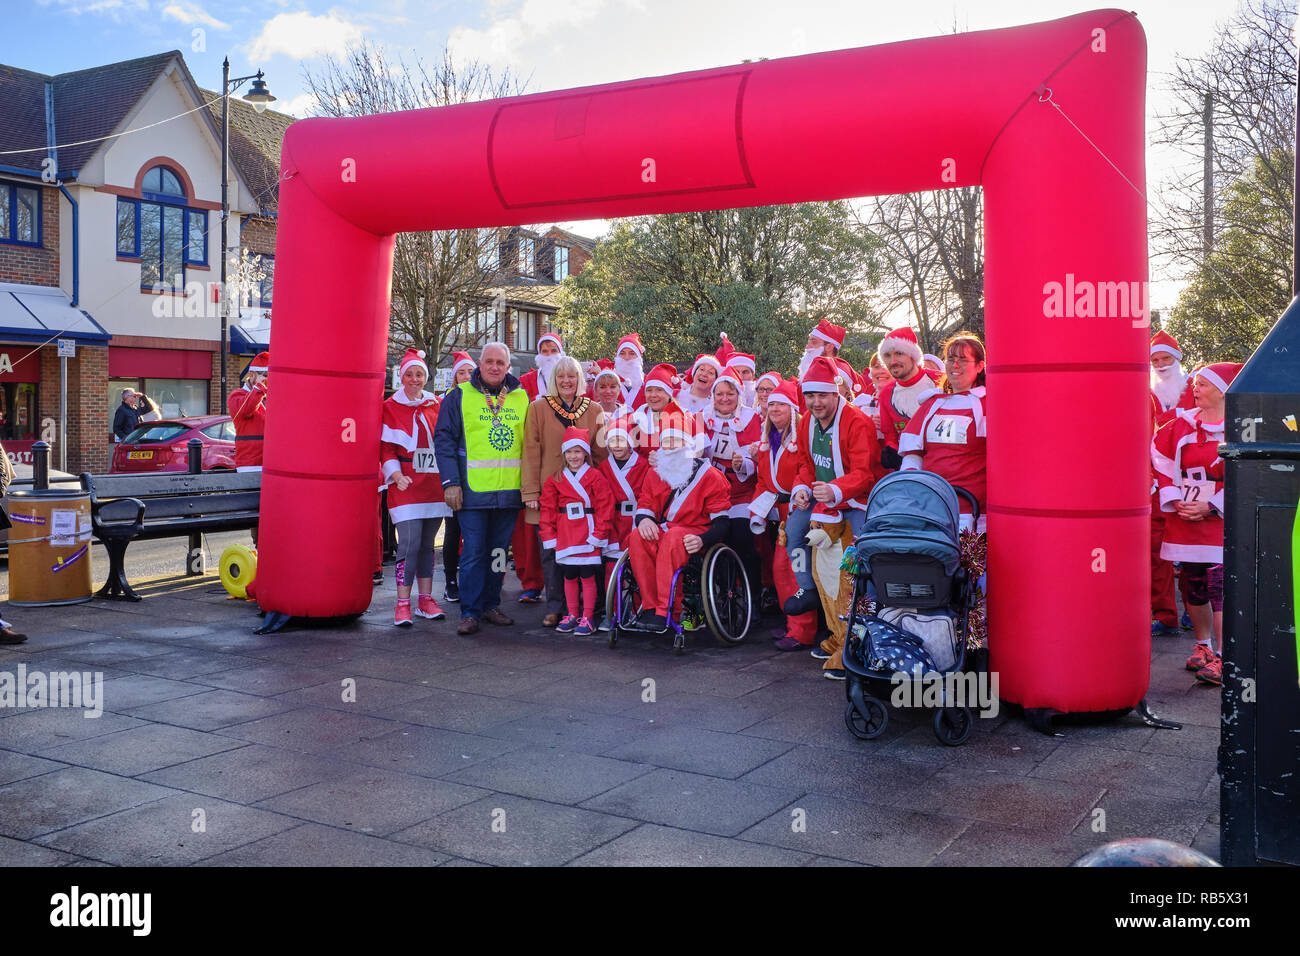 The participants dressed as Santa Claus taking part in the Great Thatcham Santa Fun Run waiting at the start for the event to begin, Thatcham, UK Stock Photo